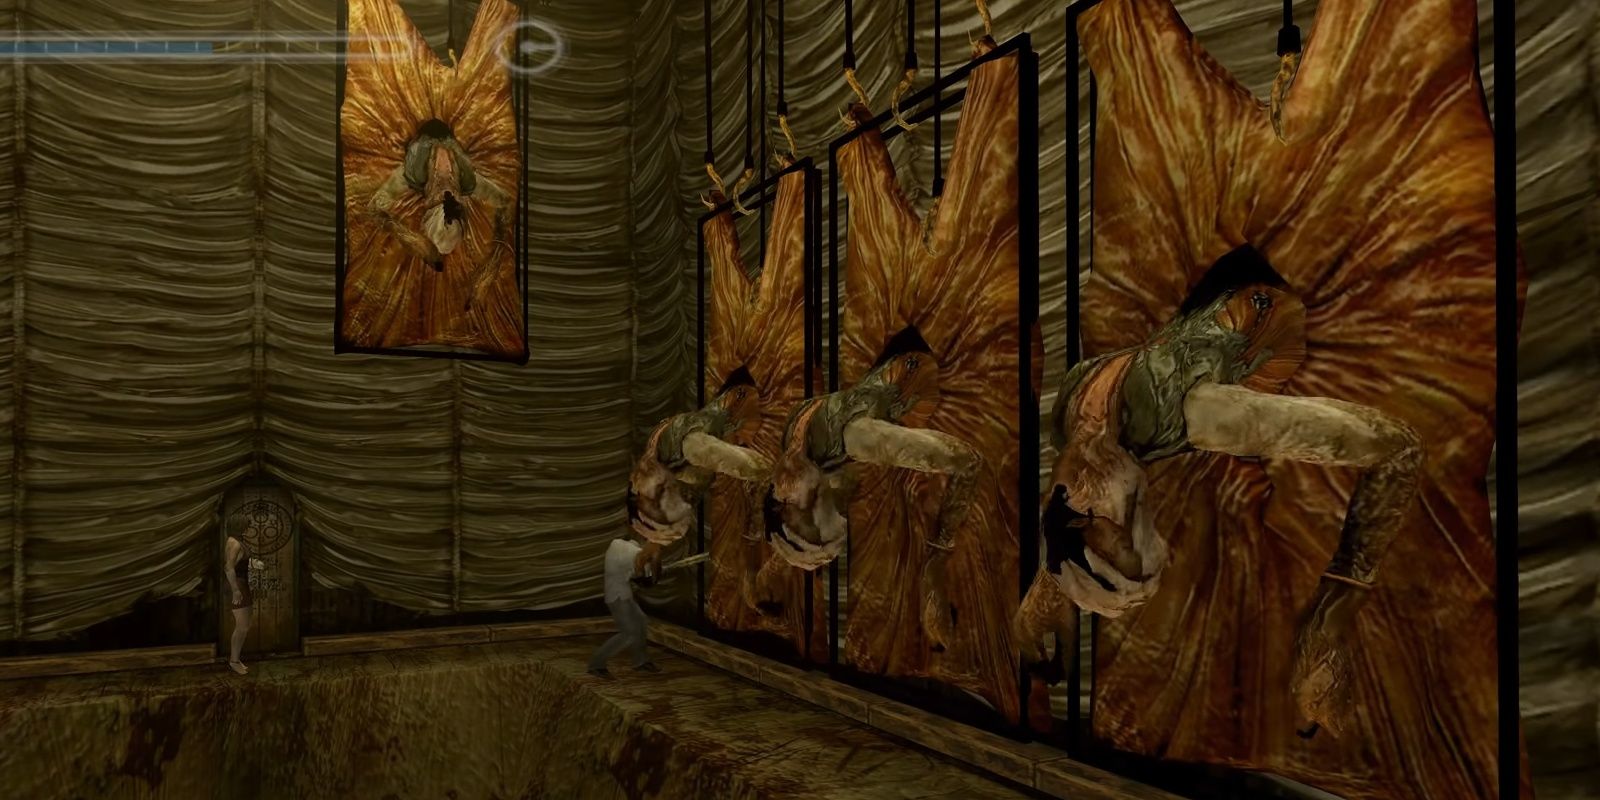 Henry attacking the real enemy among them in Silent Hill 4.